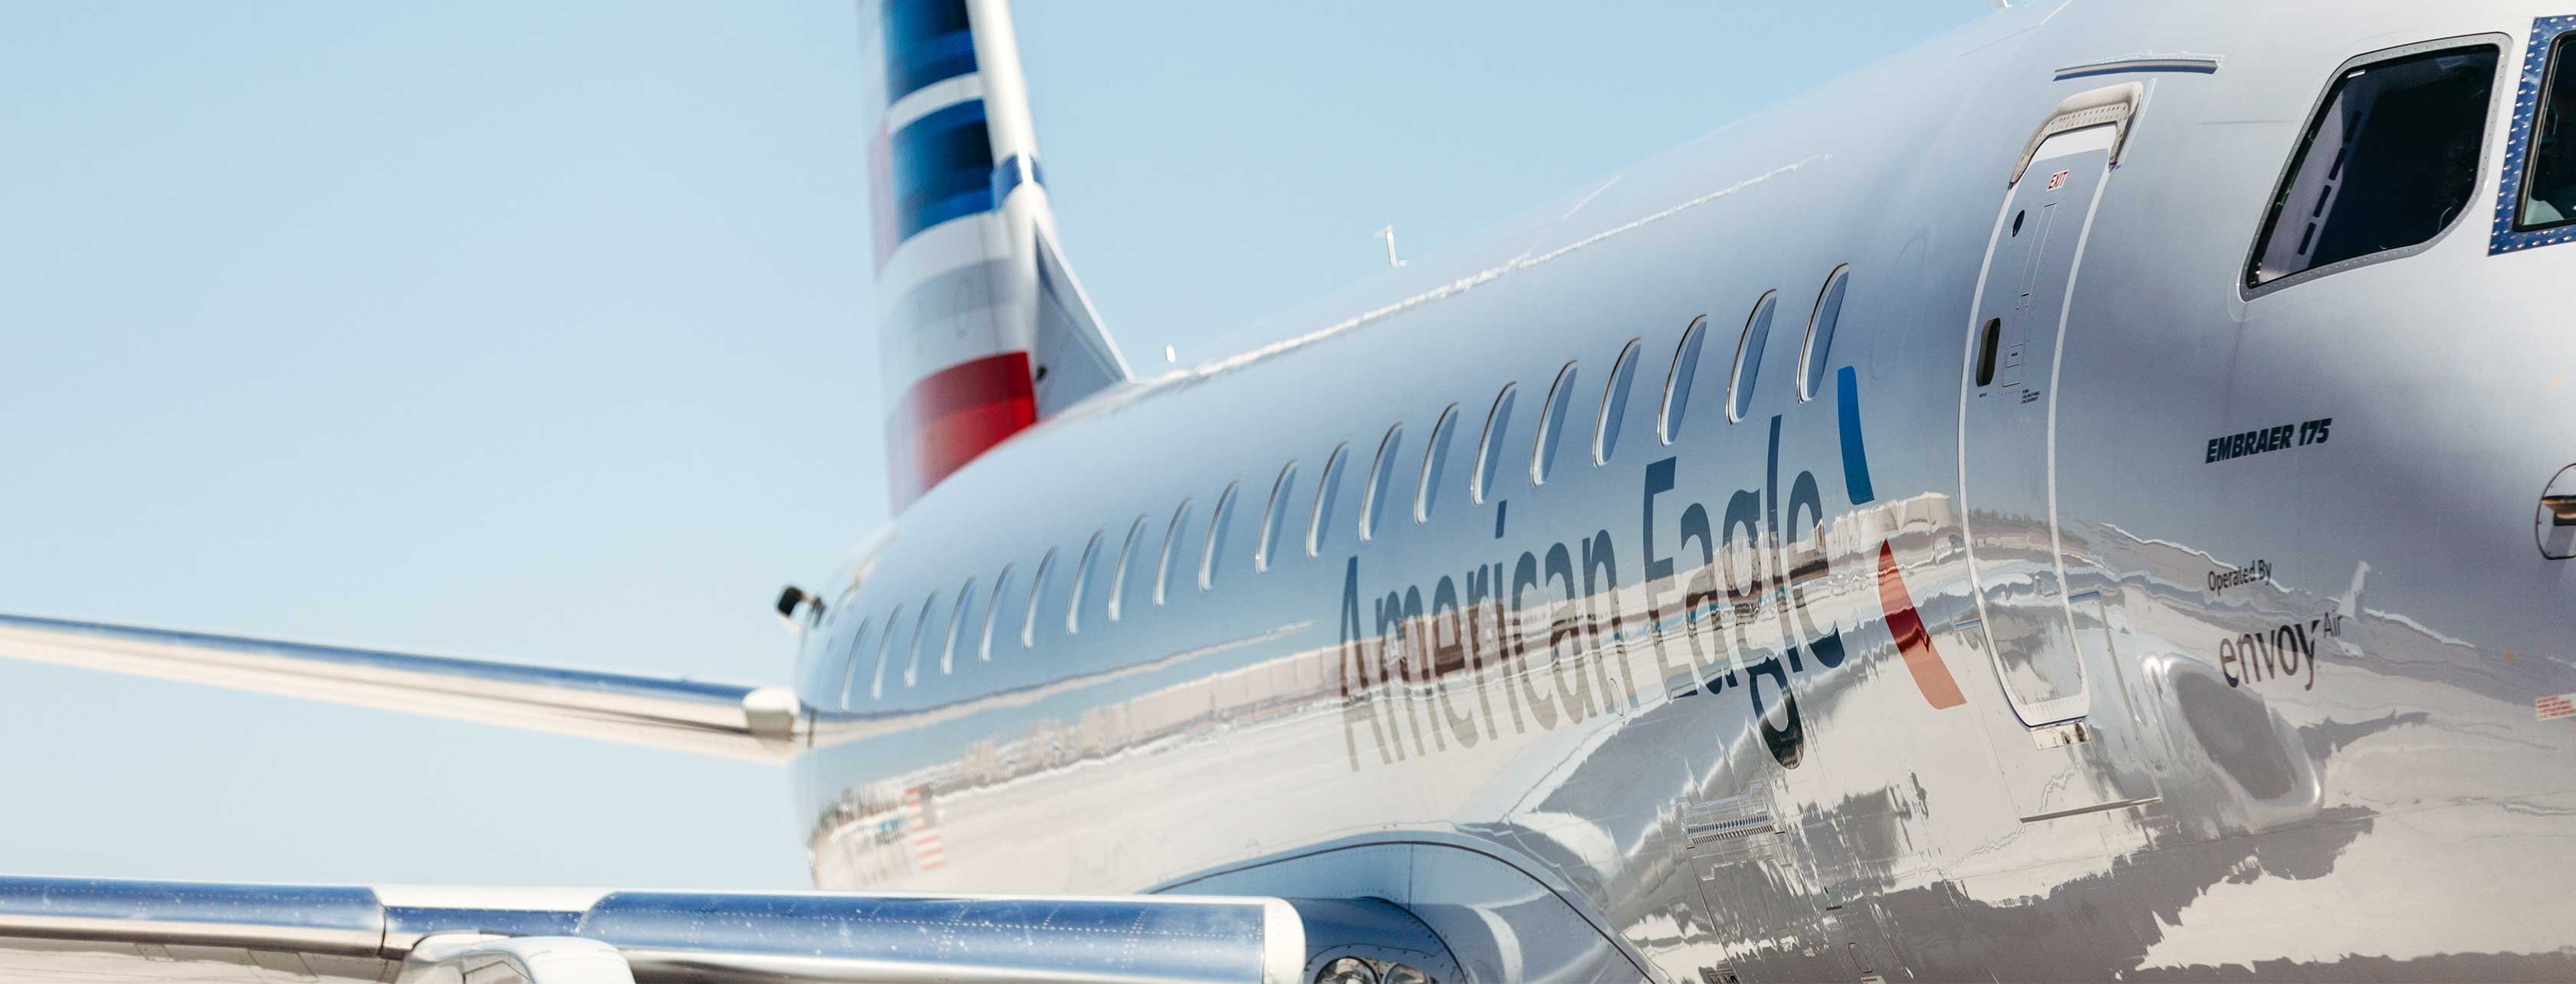 Commerical pilot job requirements to fly an American Eagle ERJ